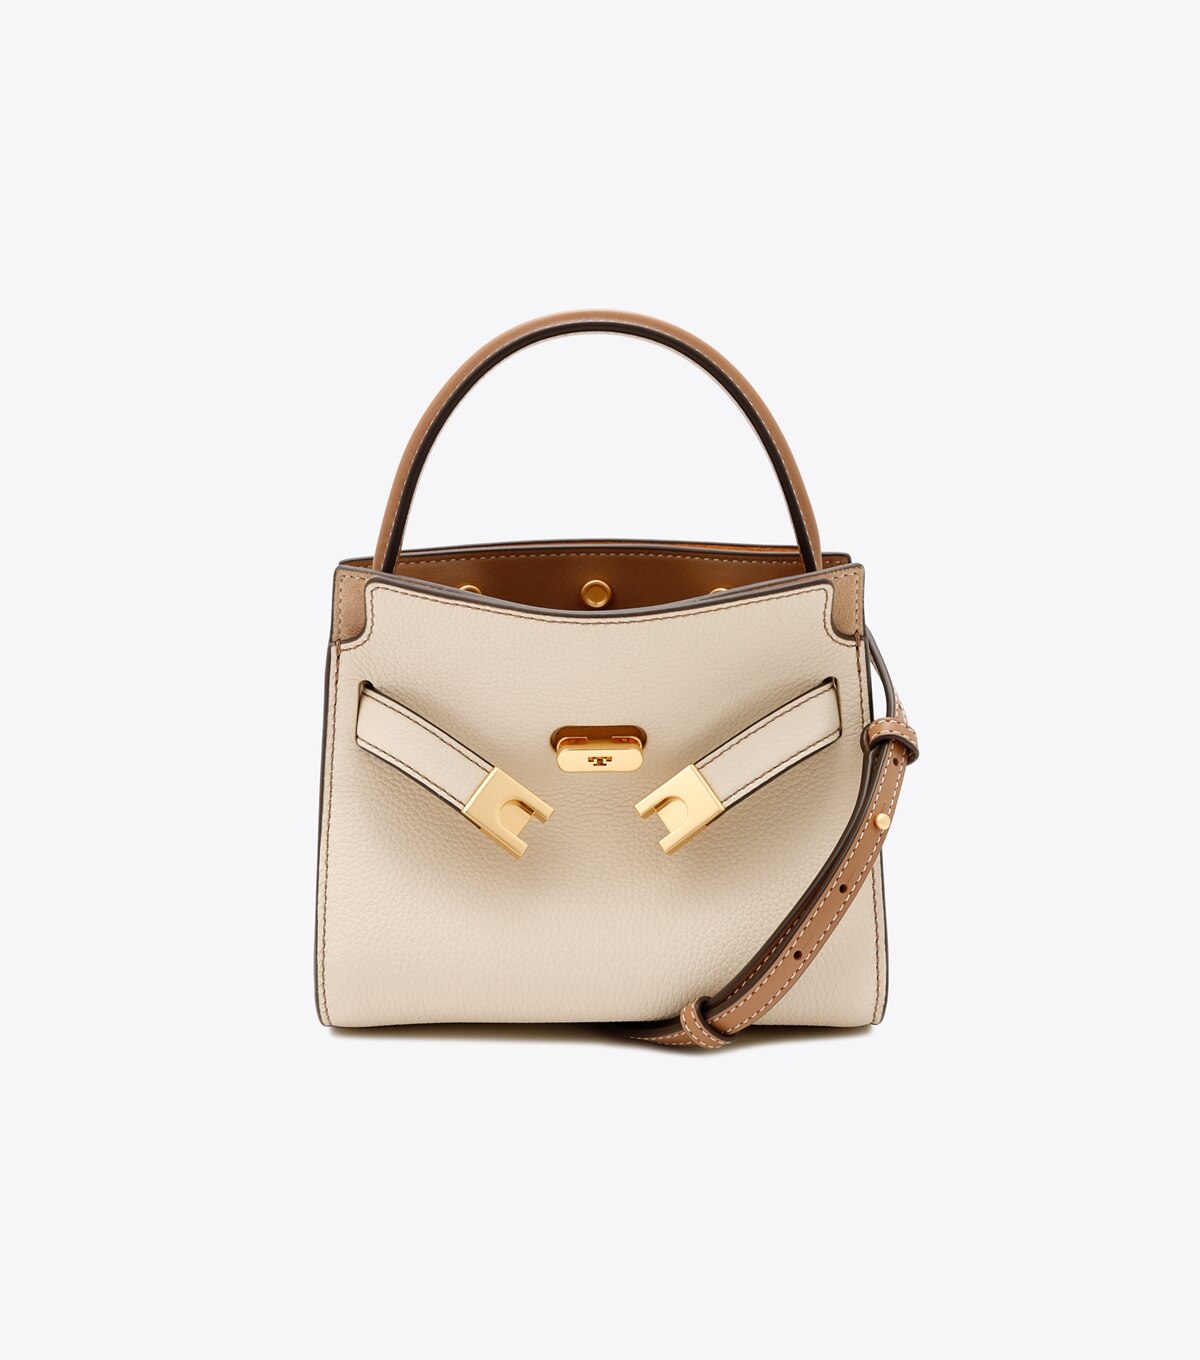 Oakbrook Center - Tory Burch's iconic Lee Radziwill Double Bag